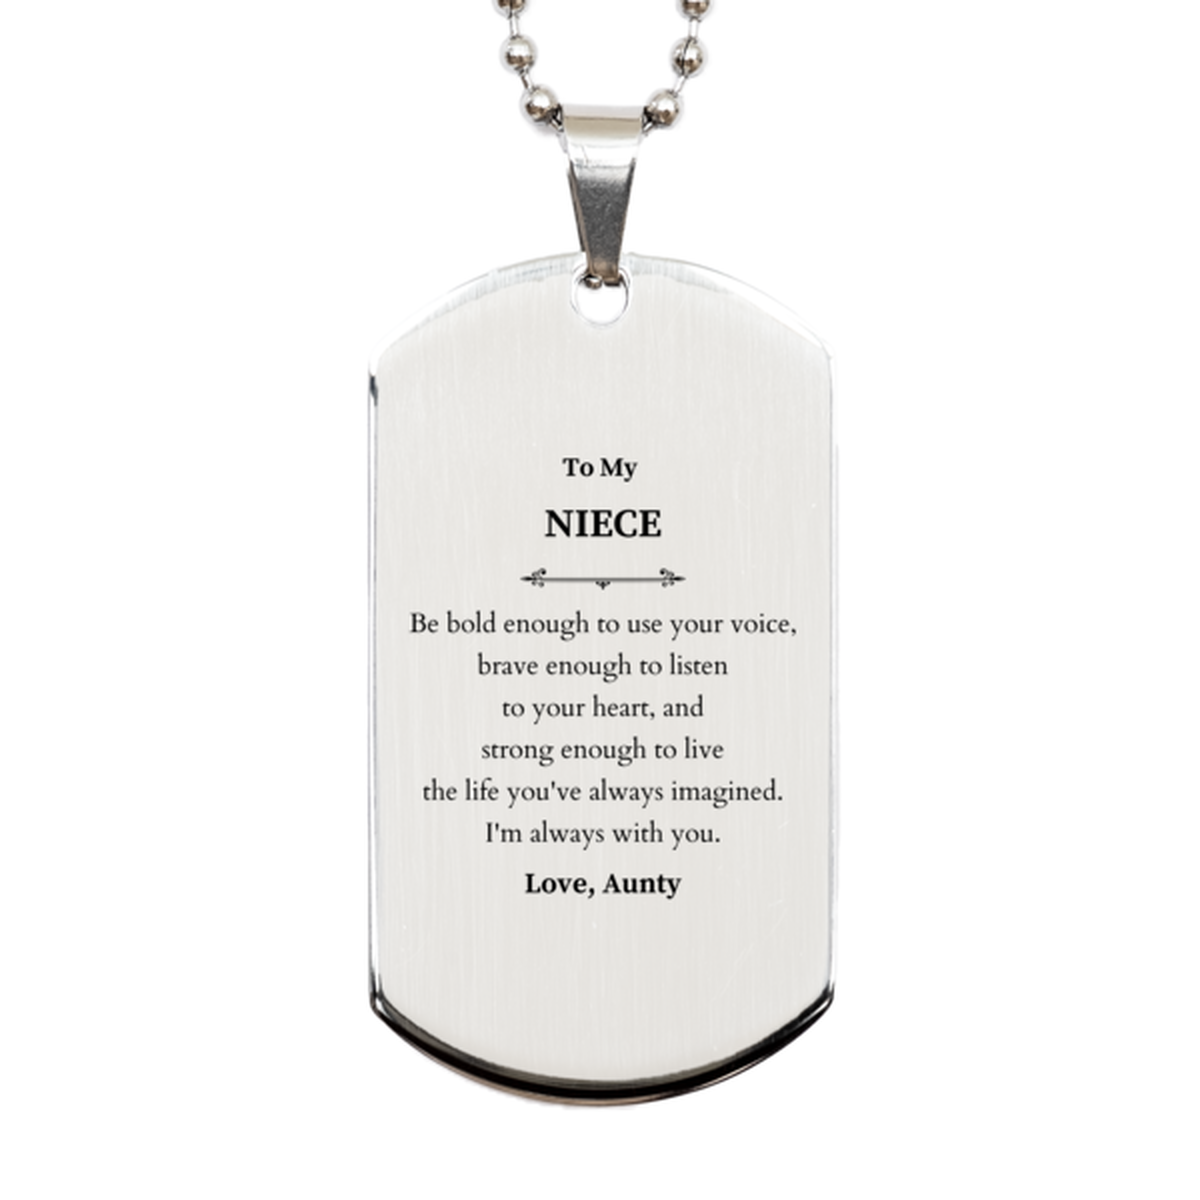 Keepsake Niece Silver Dog Tag Gift Idea Graduation Christmas Birthday Niece from Aunty, Niece Be bold enough to use your voice, brave enough to listen to your heart. Love, Aunty